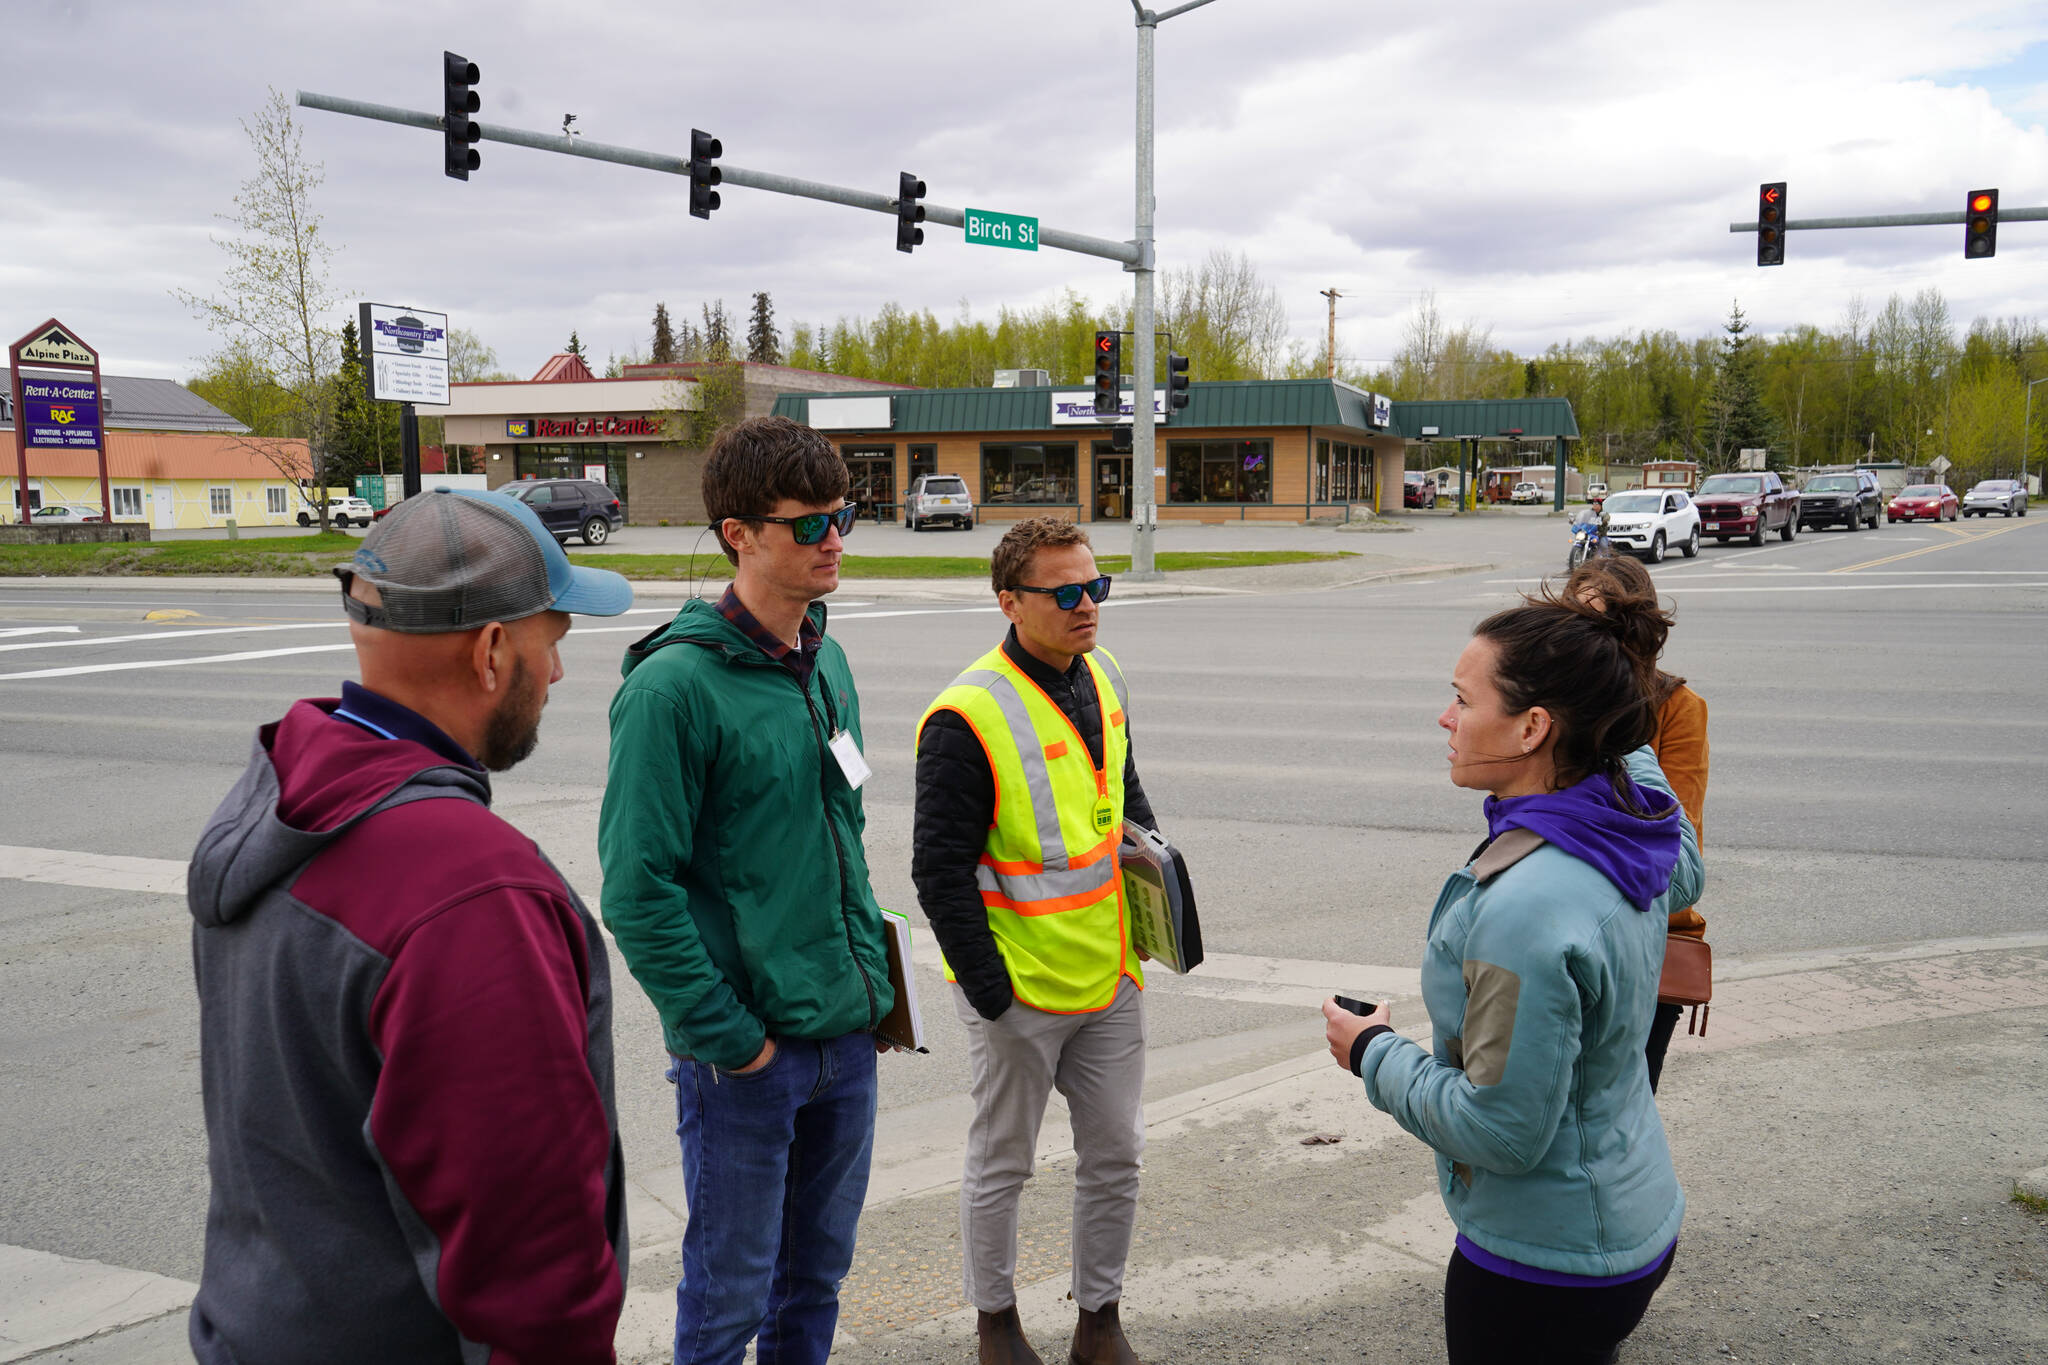 Transportation professionals discuss concerns and suggest solutions at the Sterling Highway and Birch Avenue intersection in Soldotna, Alaska, on Monday, May 22, 2023. (Jake Dye/Peninsula Clarion)